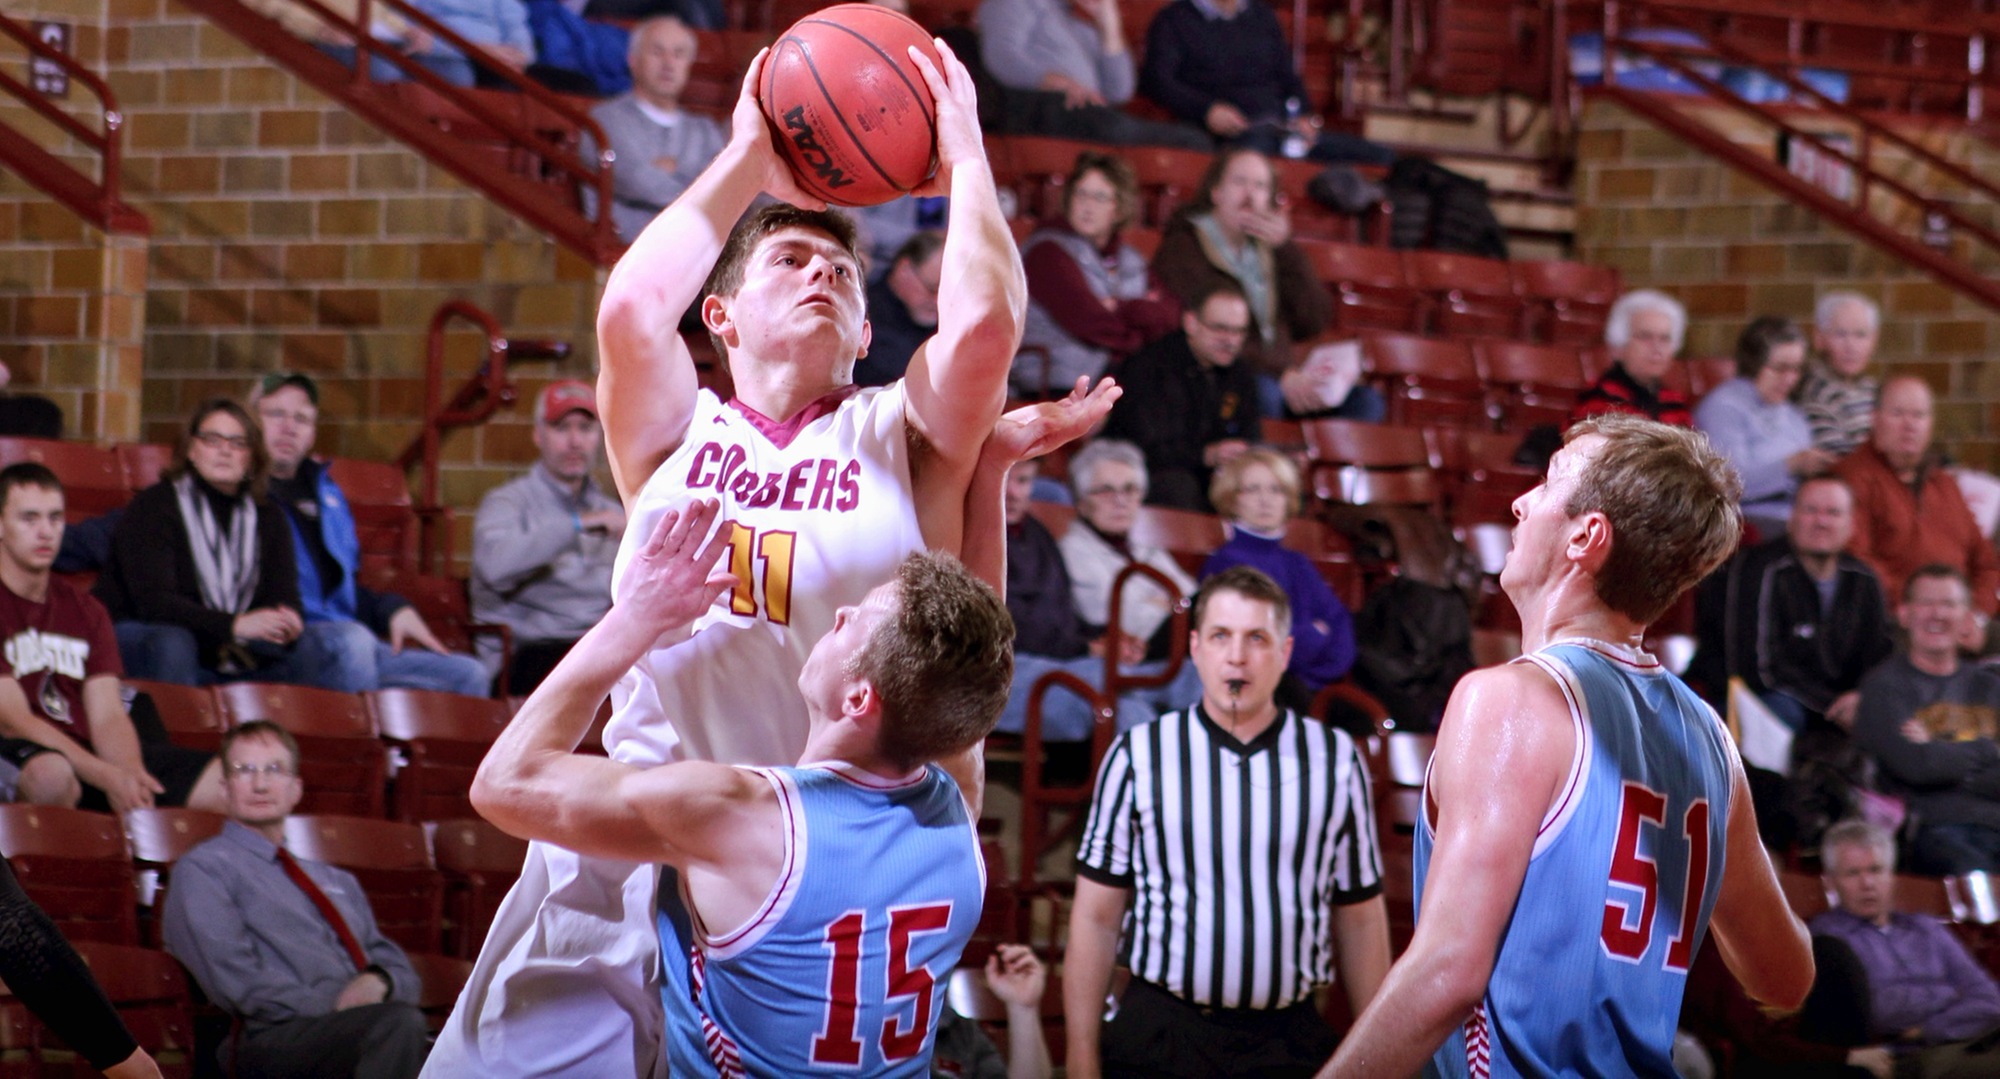 Senior Dylan Alderman drives to the basket during the first half of the Cobbers' game with St. John's.